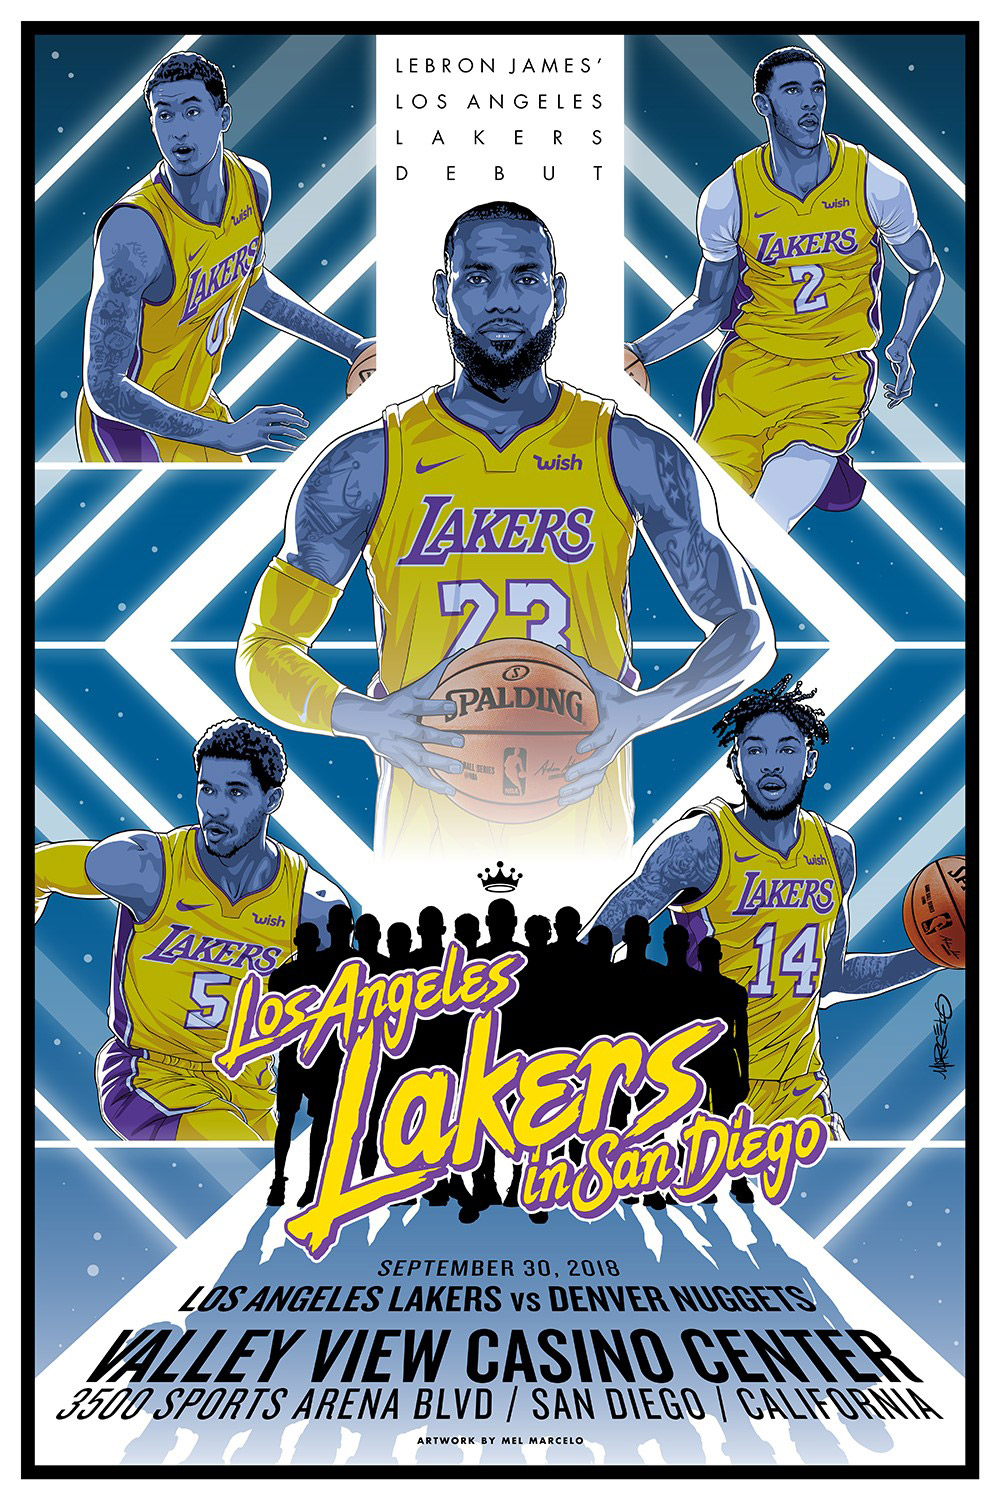 Lakers illustration by Mel Marcelo